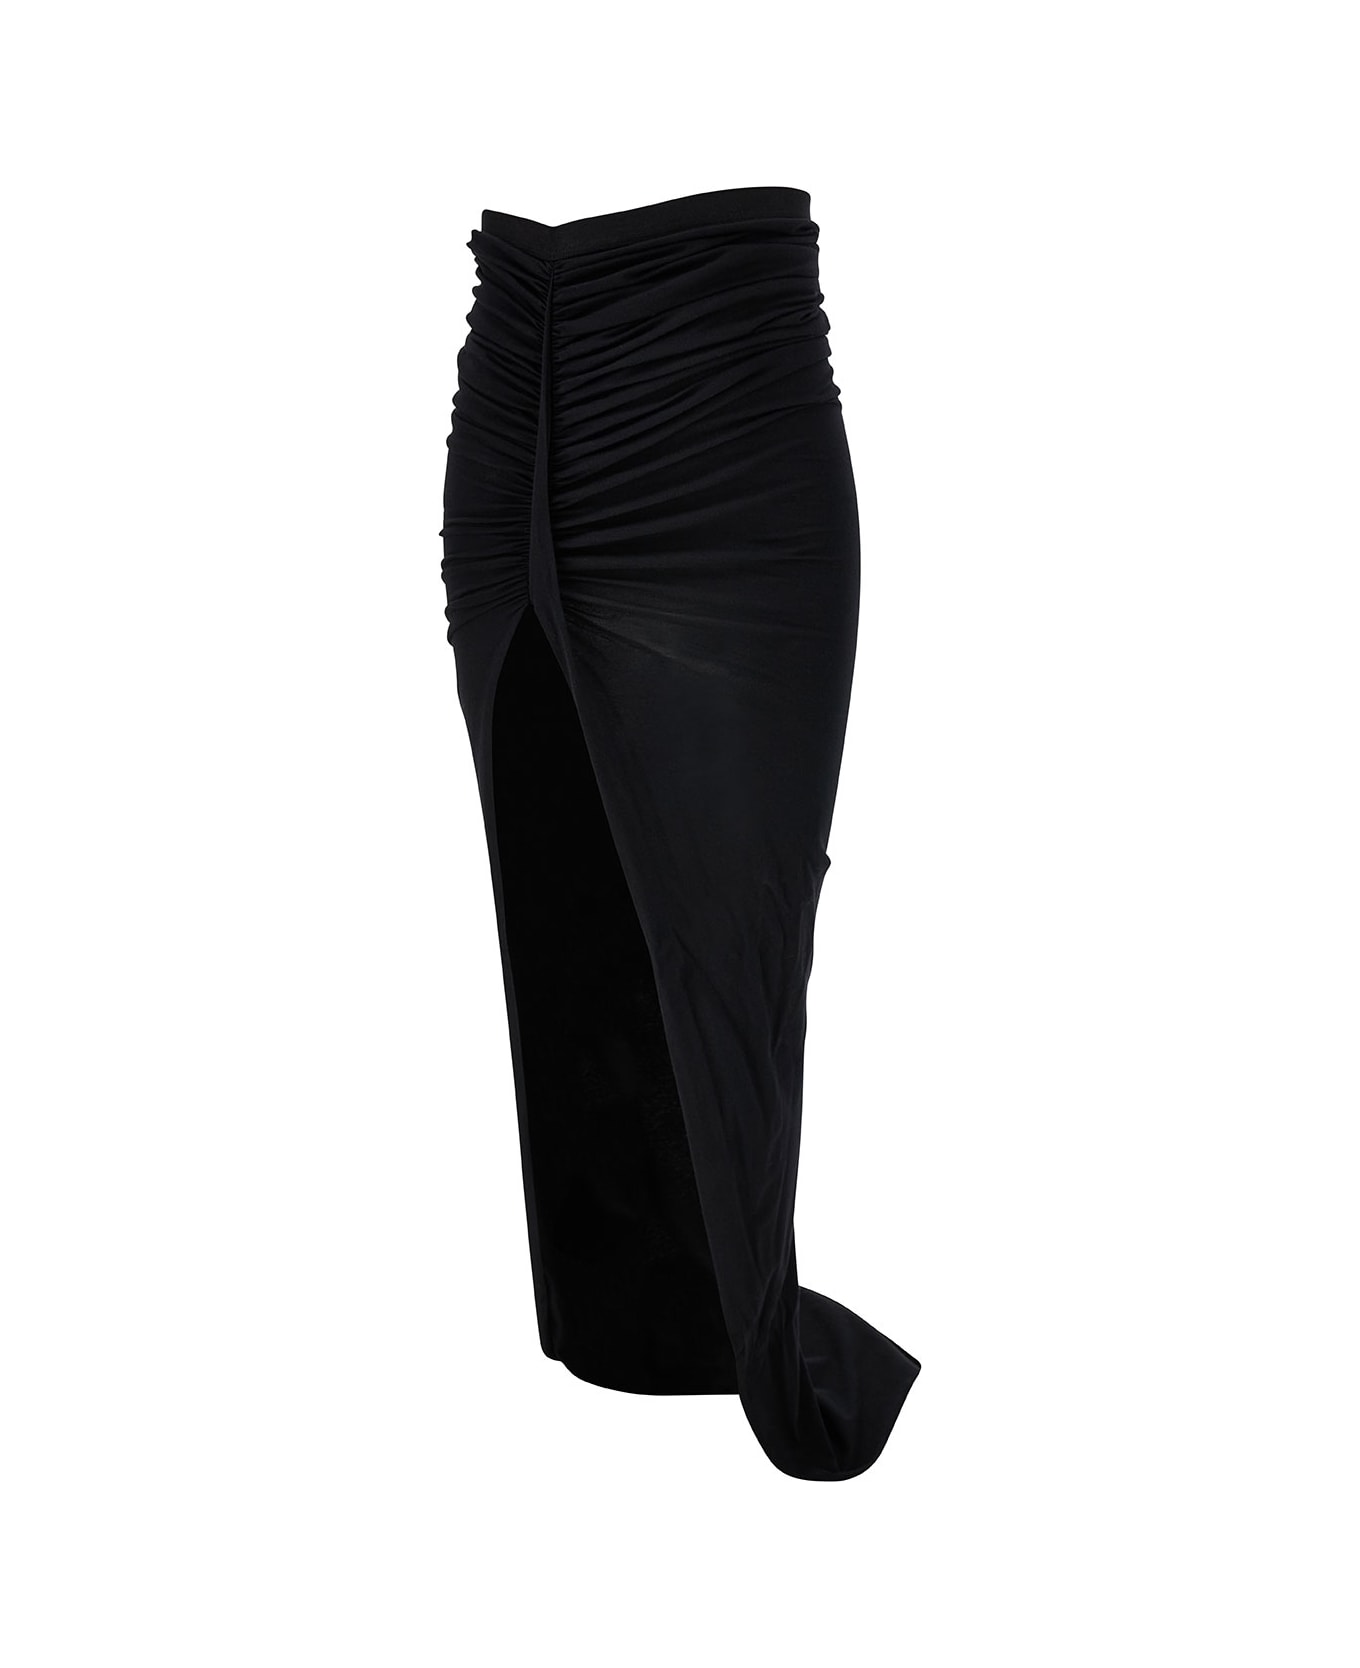 Rick Owens Maxi Black Skirt With Gatherings And Deep Split In Cotton Woman - Black スカート